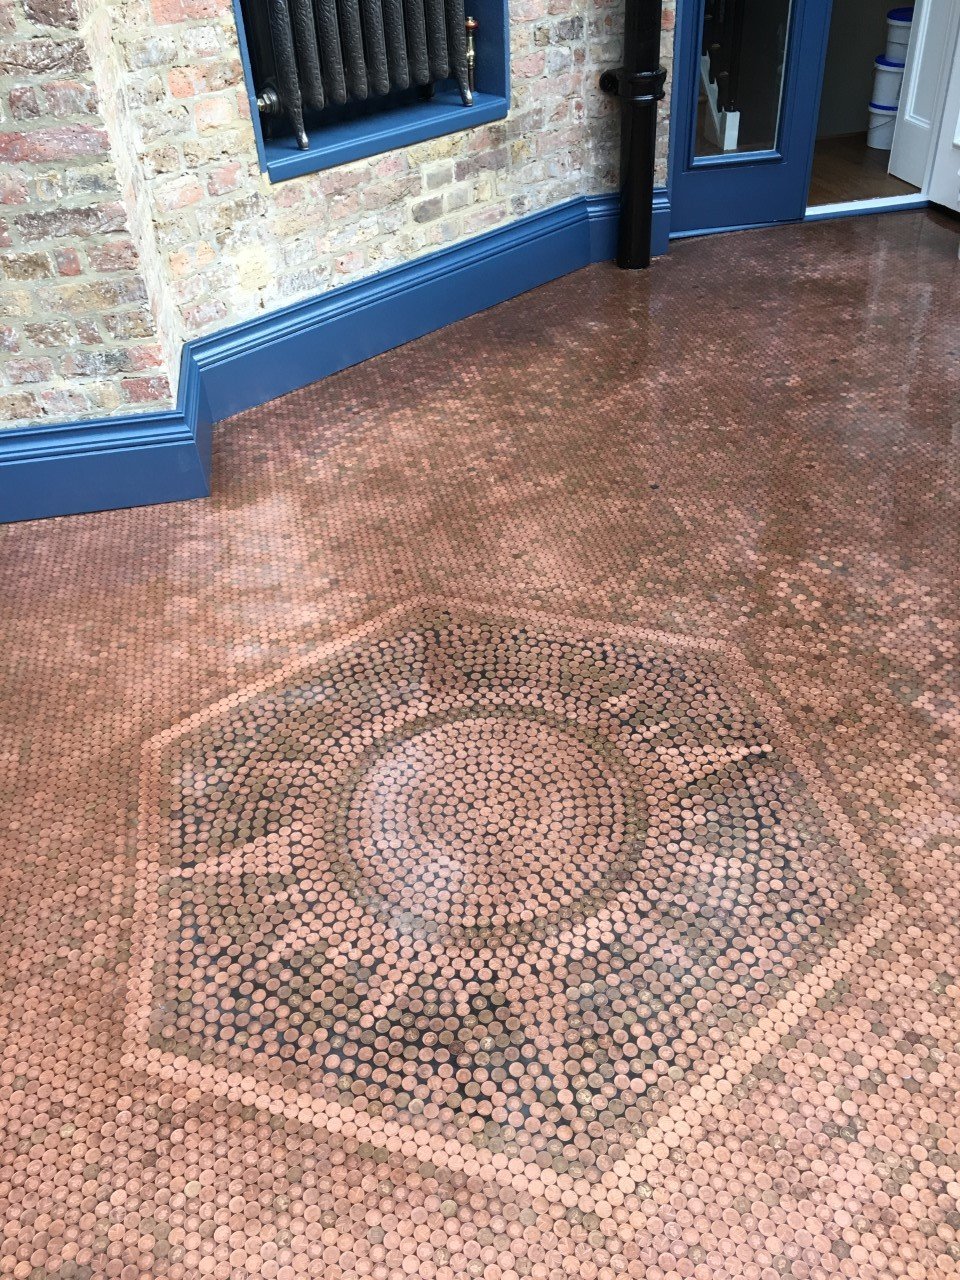 80,000 coins used in Conservatory floor